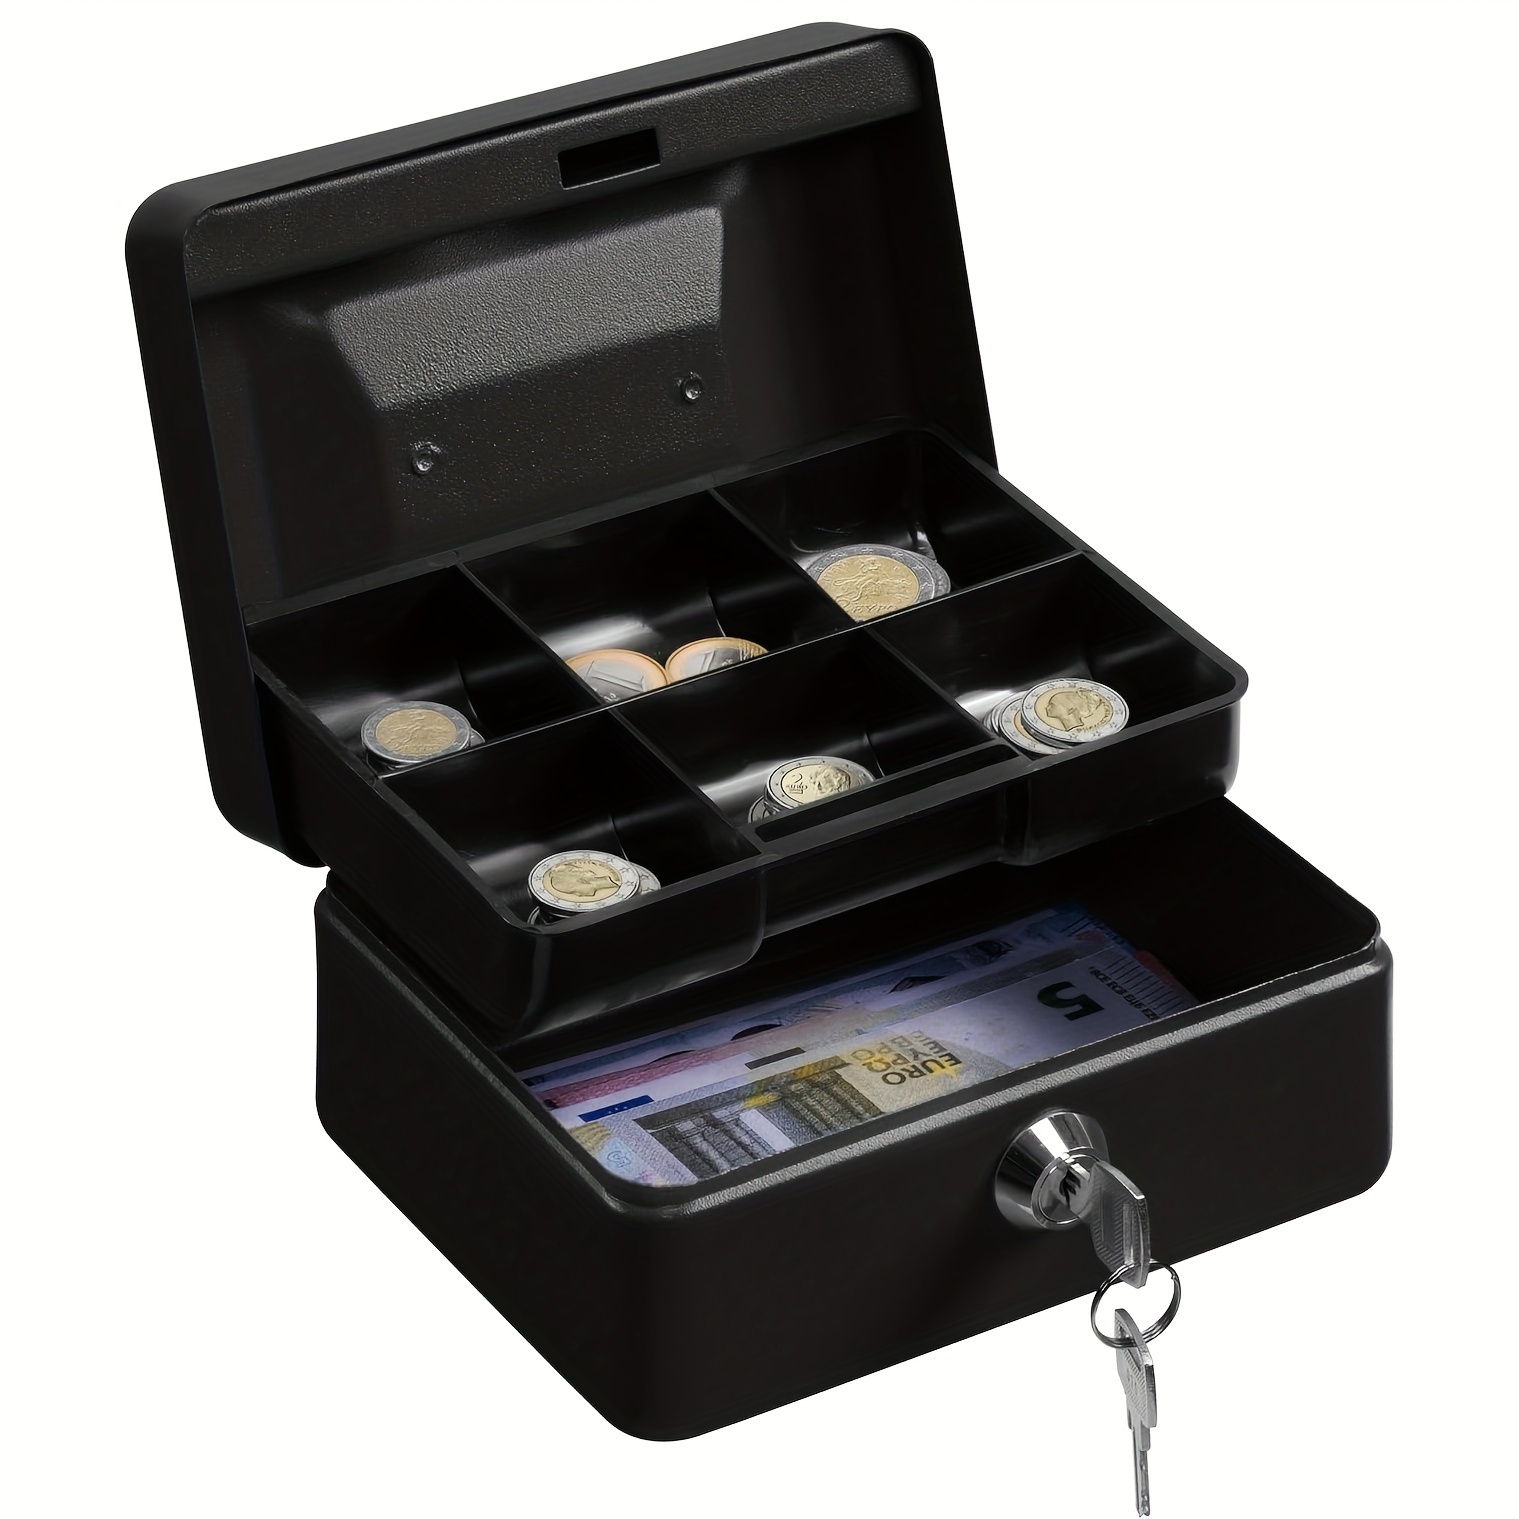 

Small Cash Box With Combination Lock 6" Durable Metal Cash Box With Money Tray For Security Lock Box 15 * 12 * 9cm Gloss Black